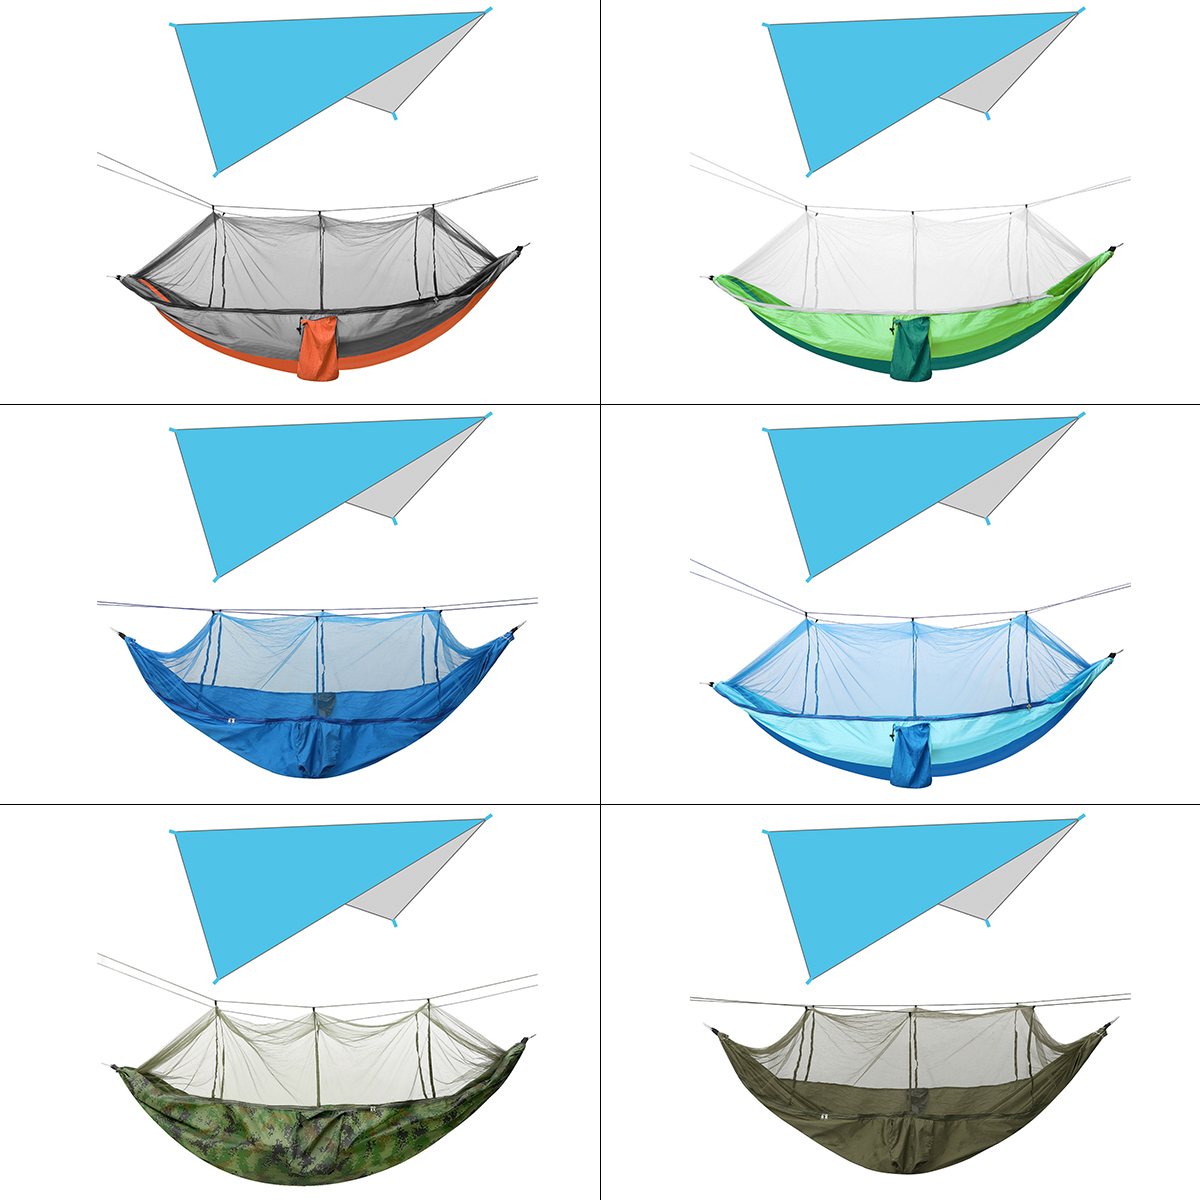 260x140cm-Double-Person-Camping-Hammock-with-Mosquito-Net--300x260cm-Awning-Outdoor-Camping-Travel-M-1731835-4